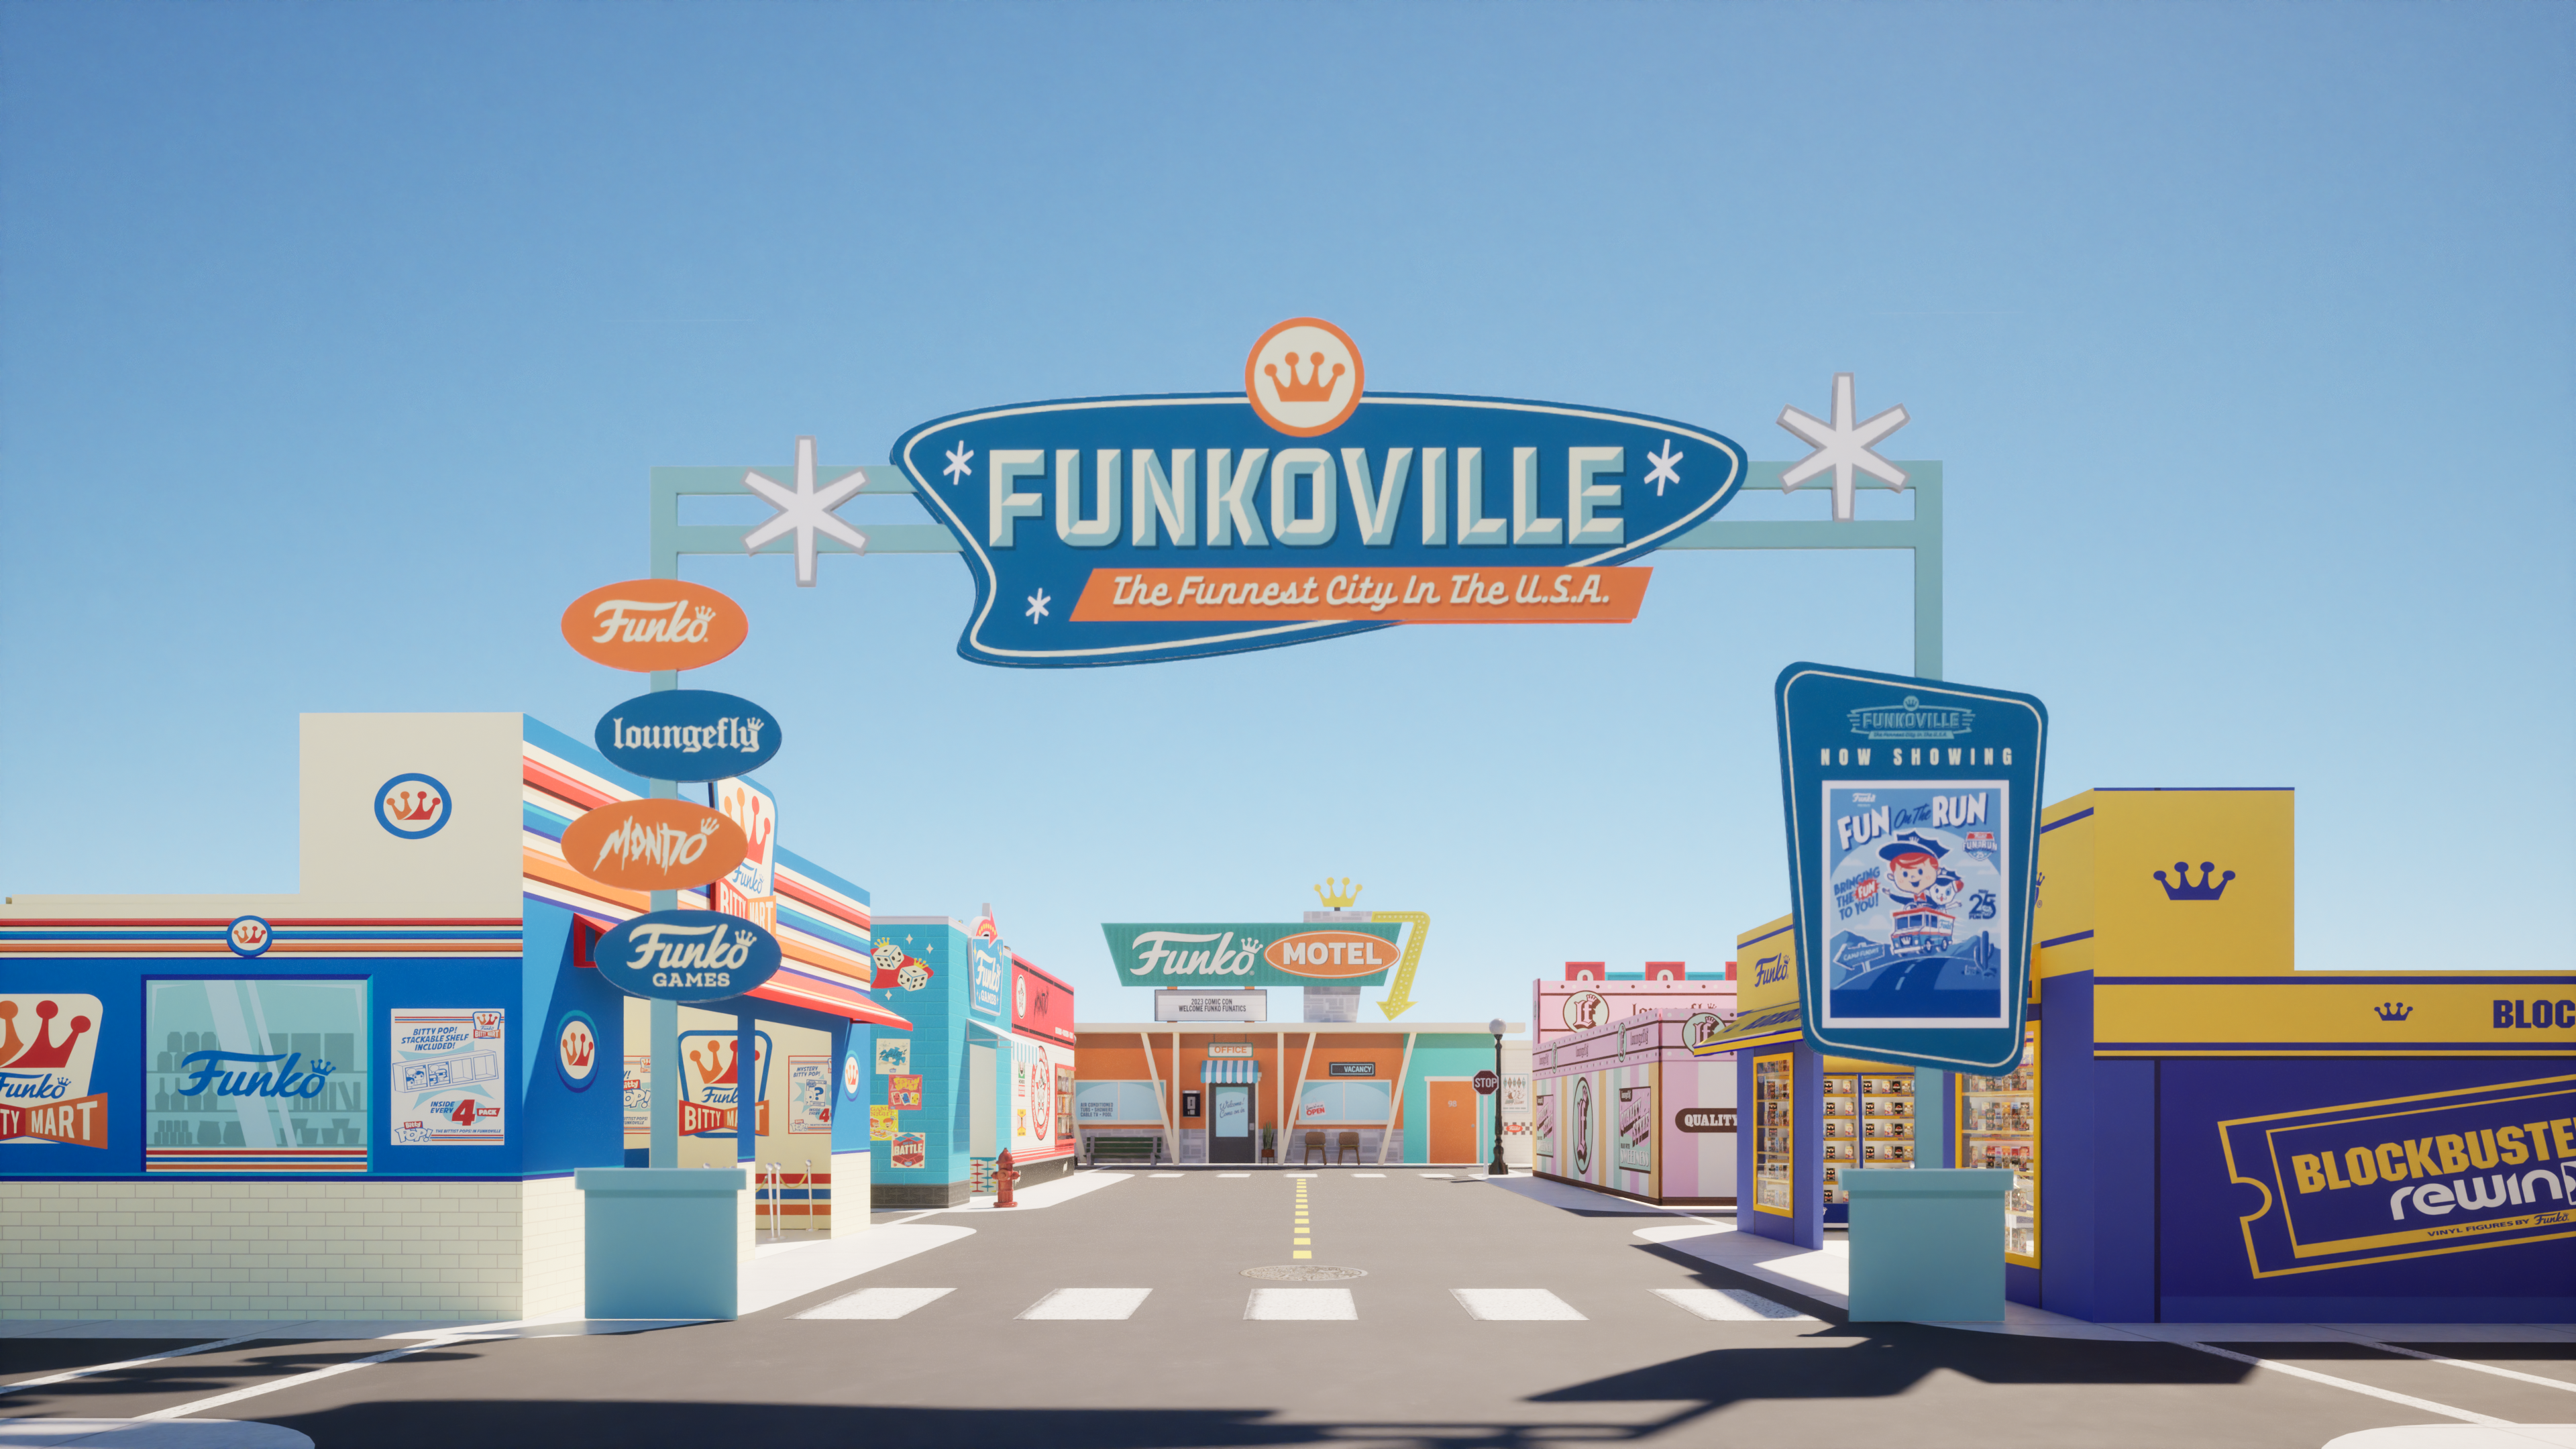 Funkoville Returns To San Diego Comic-Con With Double The Footprint Of Last Year